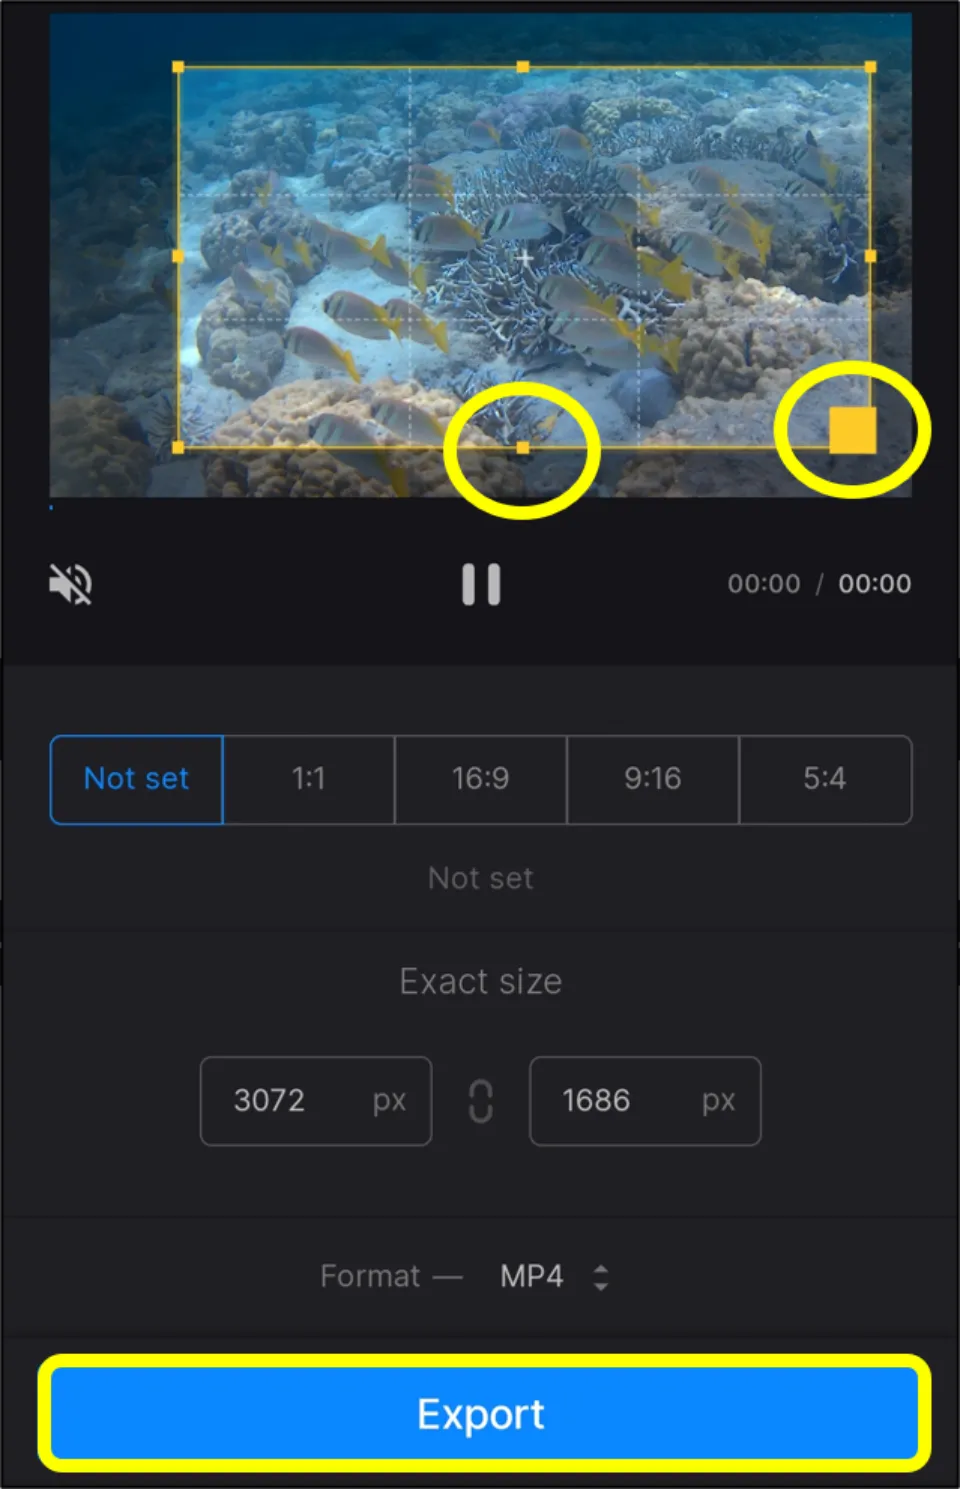 Choose the video aspect ratio and select the video portion you want to crop. Then, hit Export